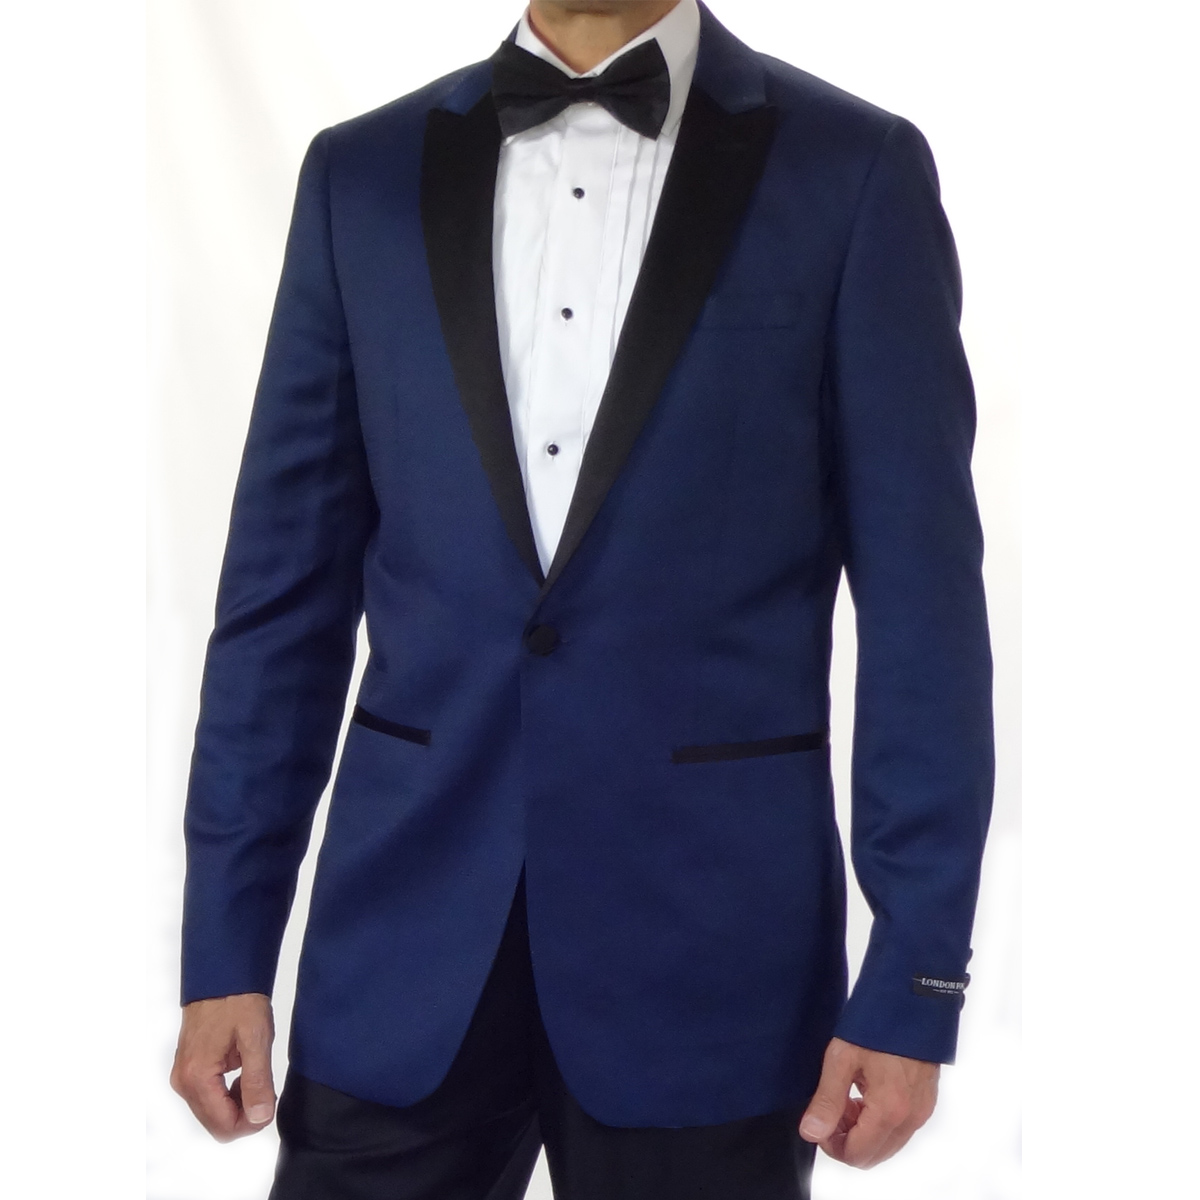 Navy Blue Tuxedo Jacket With Black Pants | vlr.eng.br